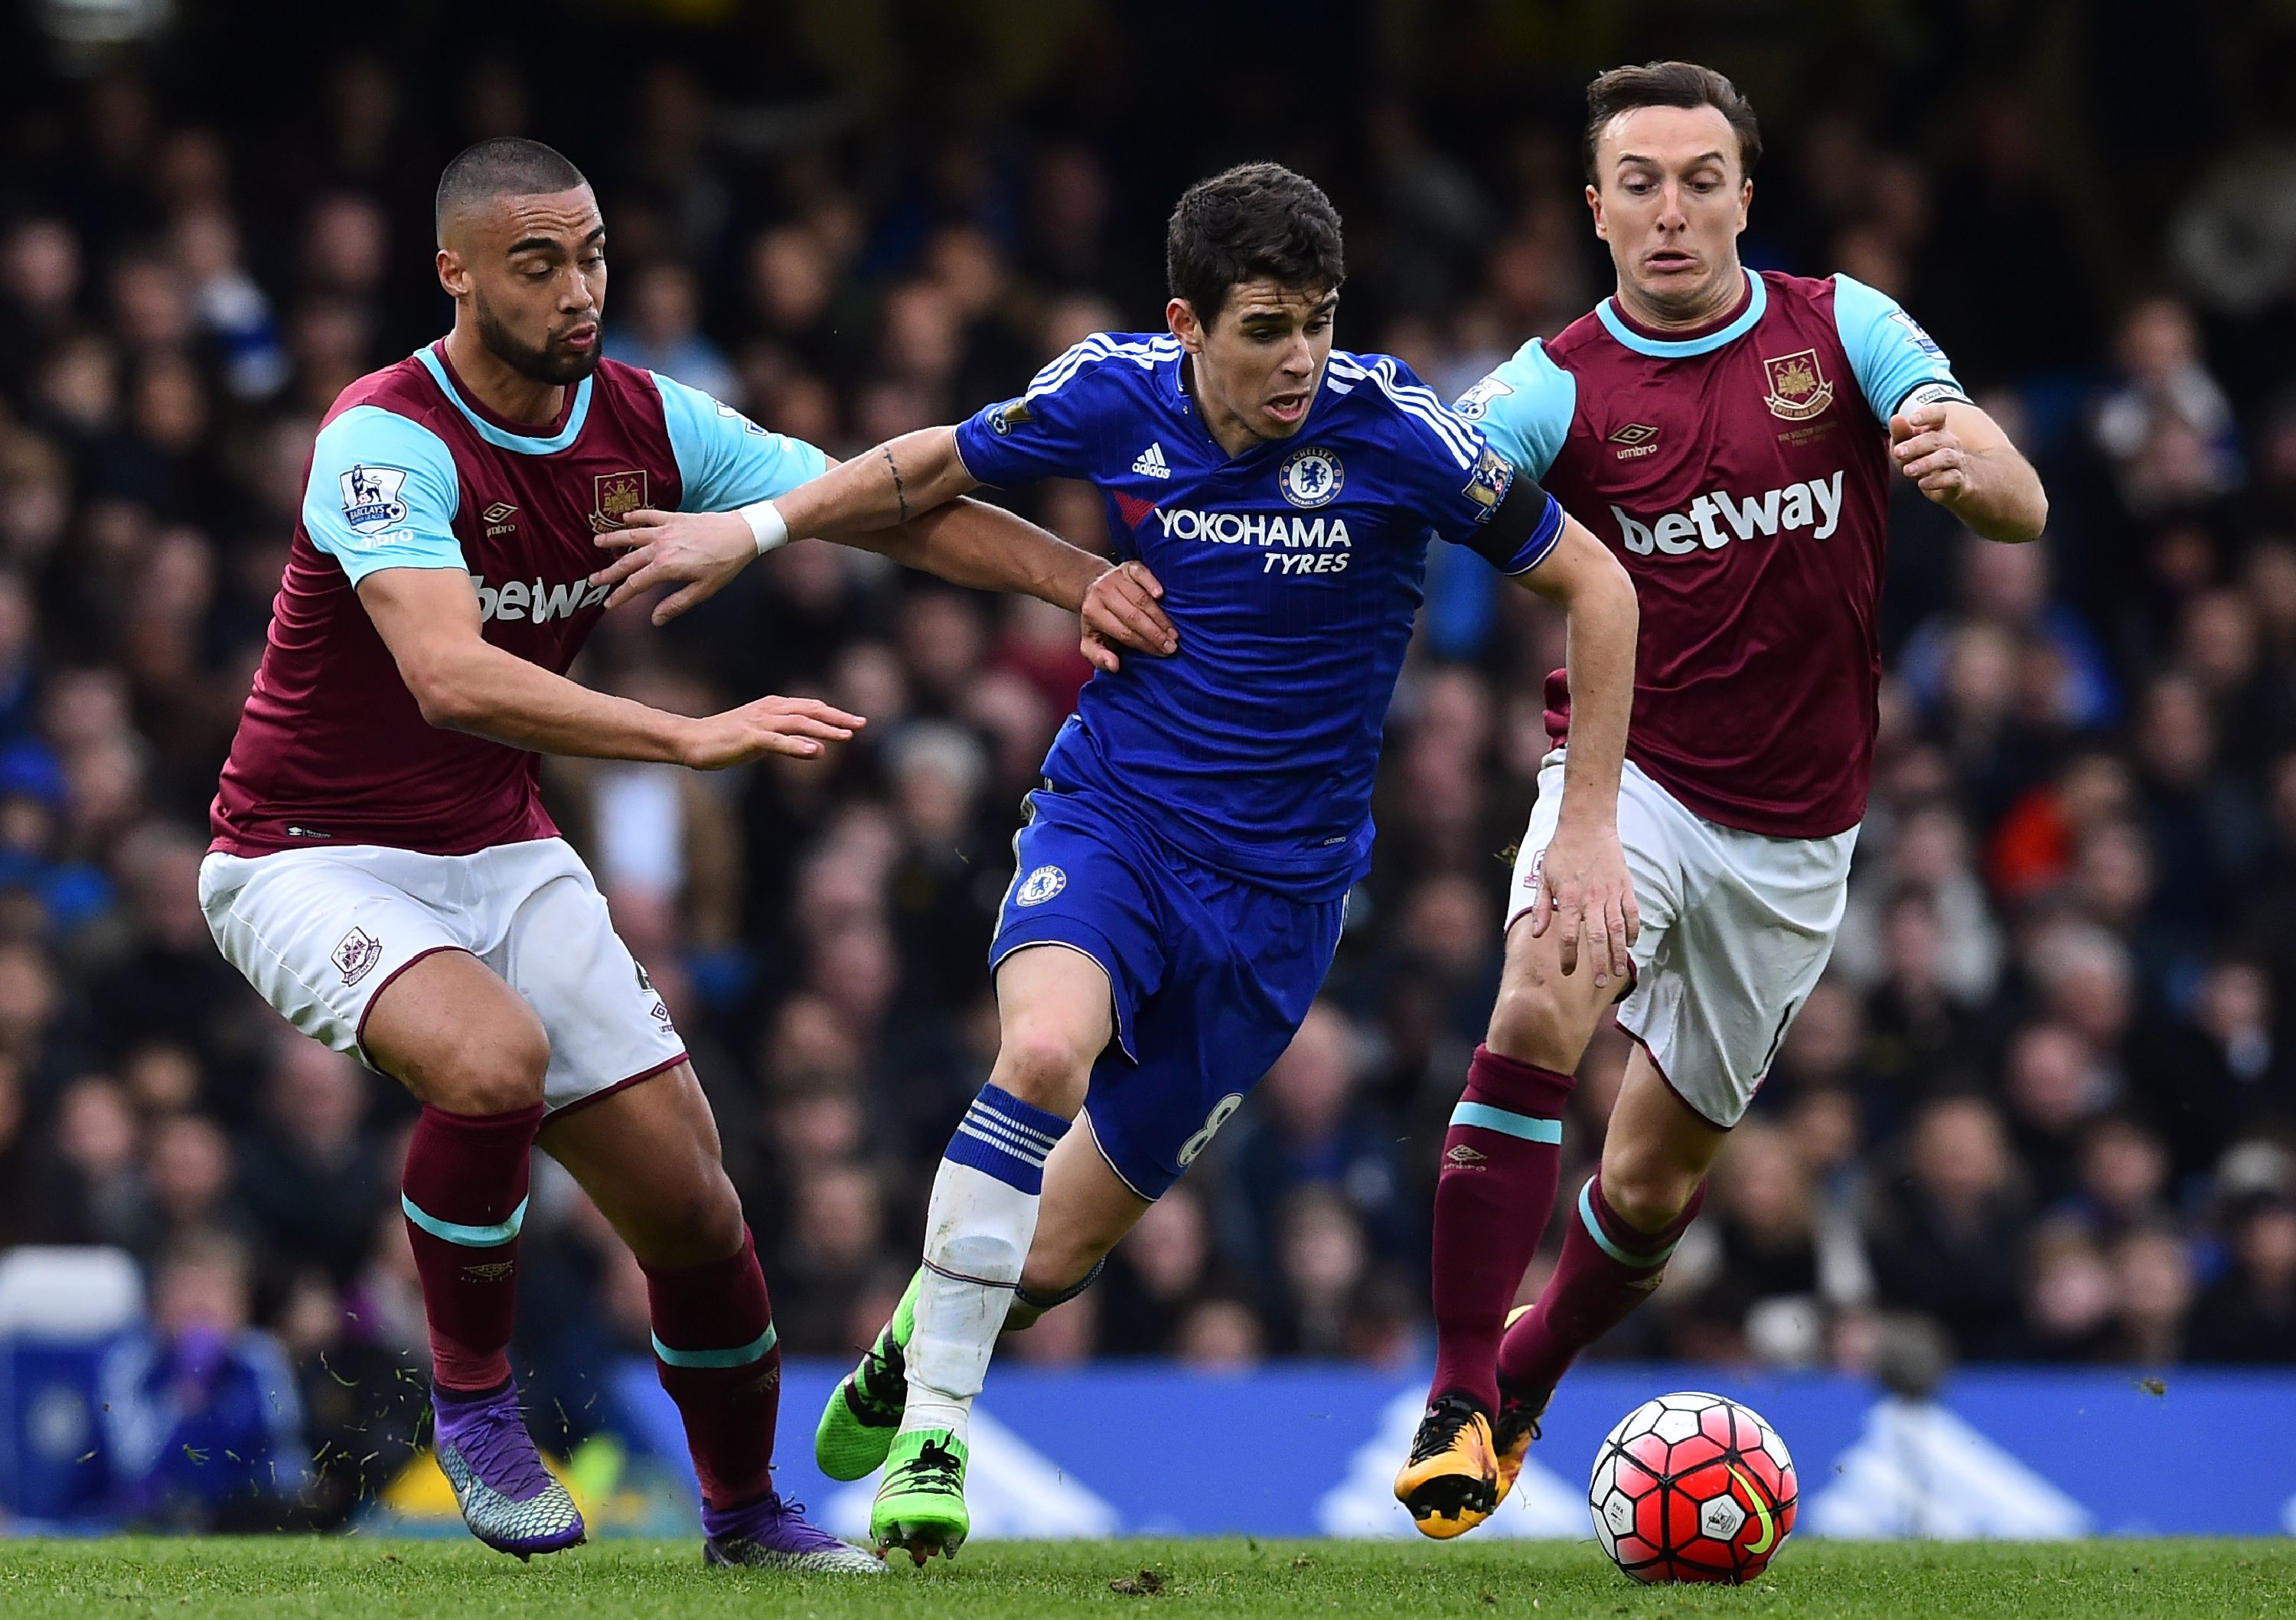 Chelsea's Brazilian midfielder Oscar (C) vies with West Ham United's New Zealand defender Winston Reid (L) and West Ham United's English midfielder Mark Noble during the English Premier League football match between Chelsea and West Ham United at Stamford Bridge in London on March 19, 2016.
The game finished 2-2. / AFP / Ben STANSALL / RESTRICTED TO EDITORIAL USE. No use with unauthorized audio, video, data, fixture lists, club/league logos or 'live' services. Online in-match use limited to 75 images, no video emulation. No use in betting, games or single club/league/player publications.  /         (Photo credit should read BEN STANSALL/AFP/Getty Images)